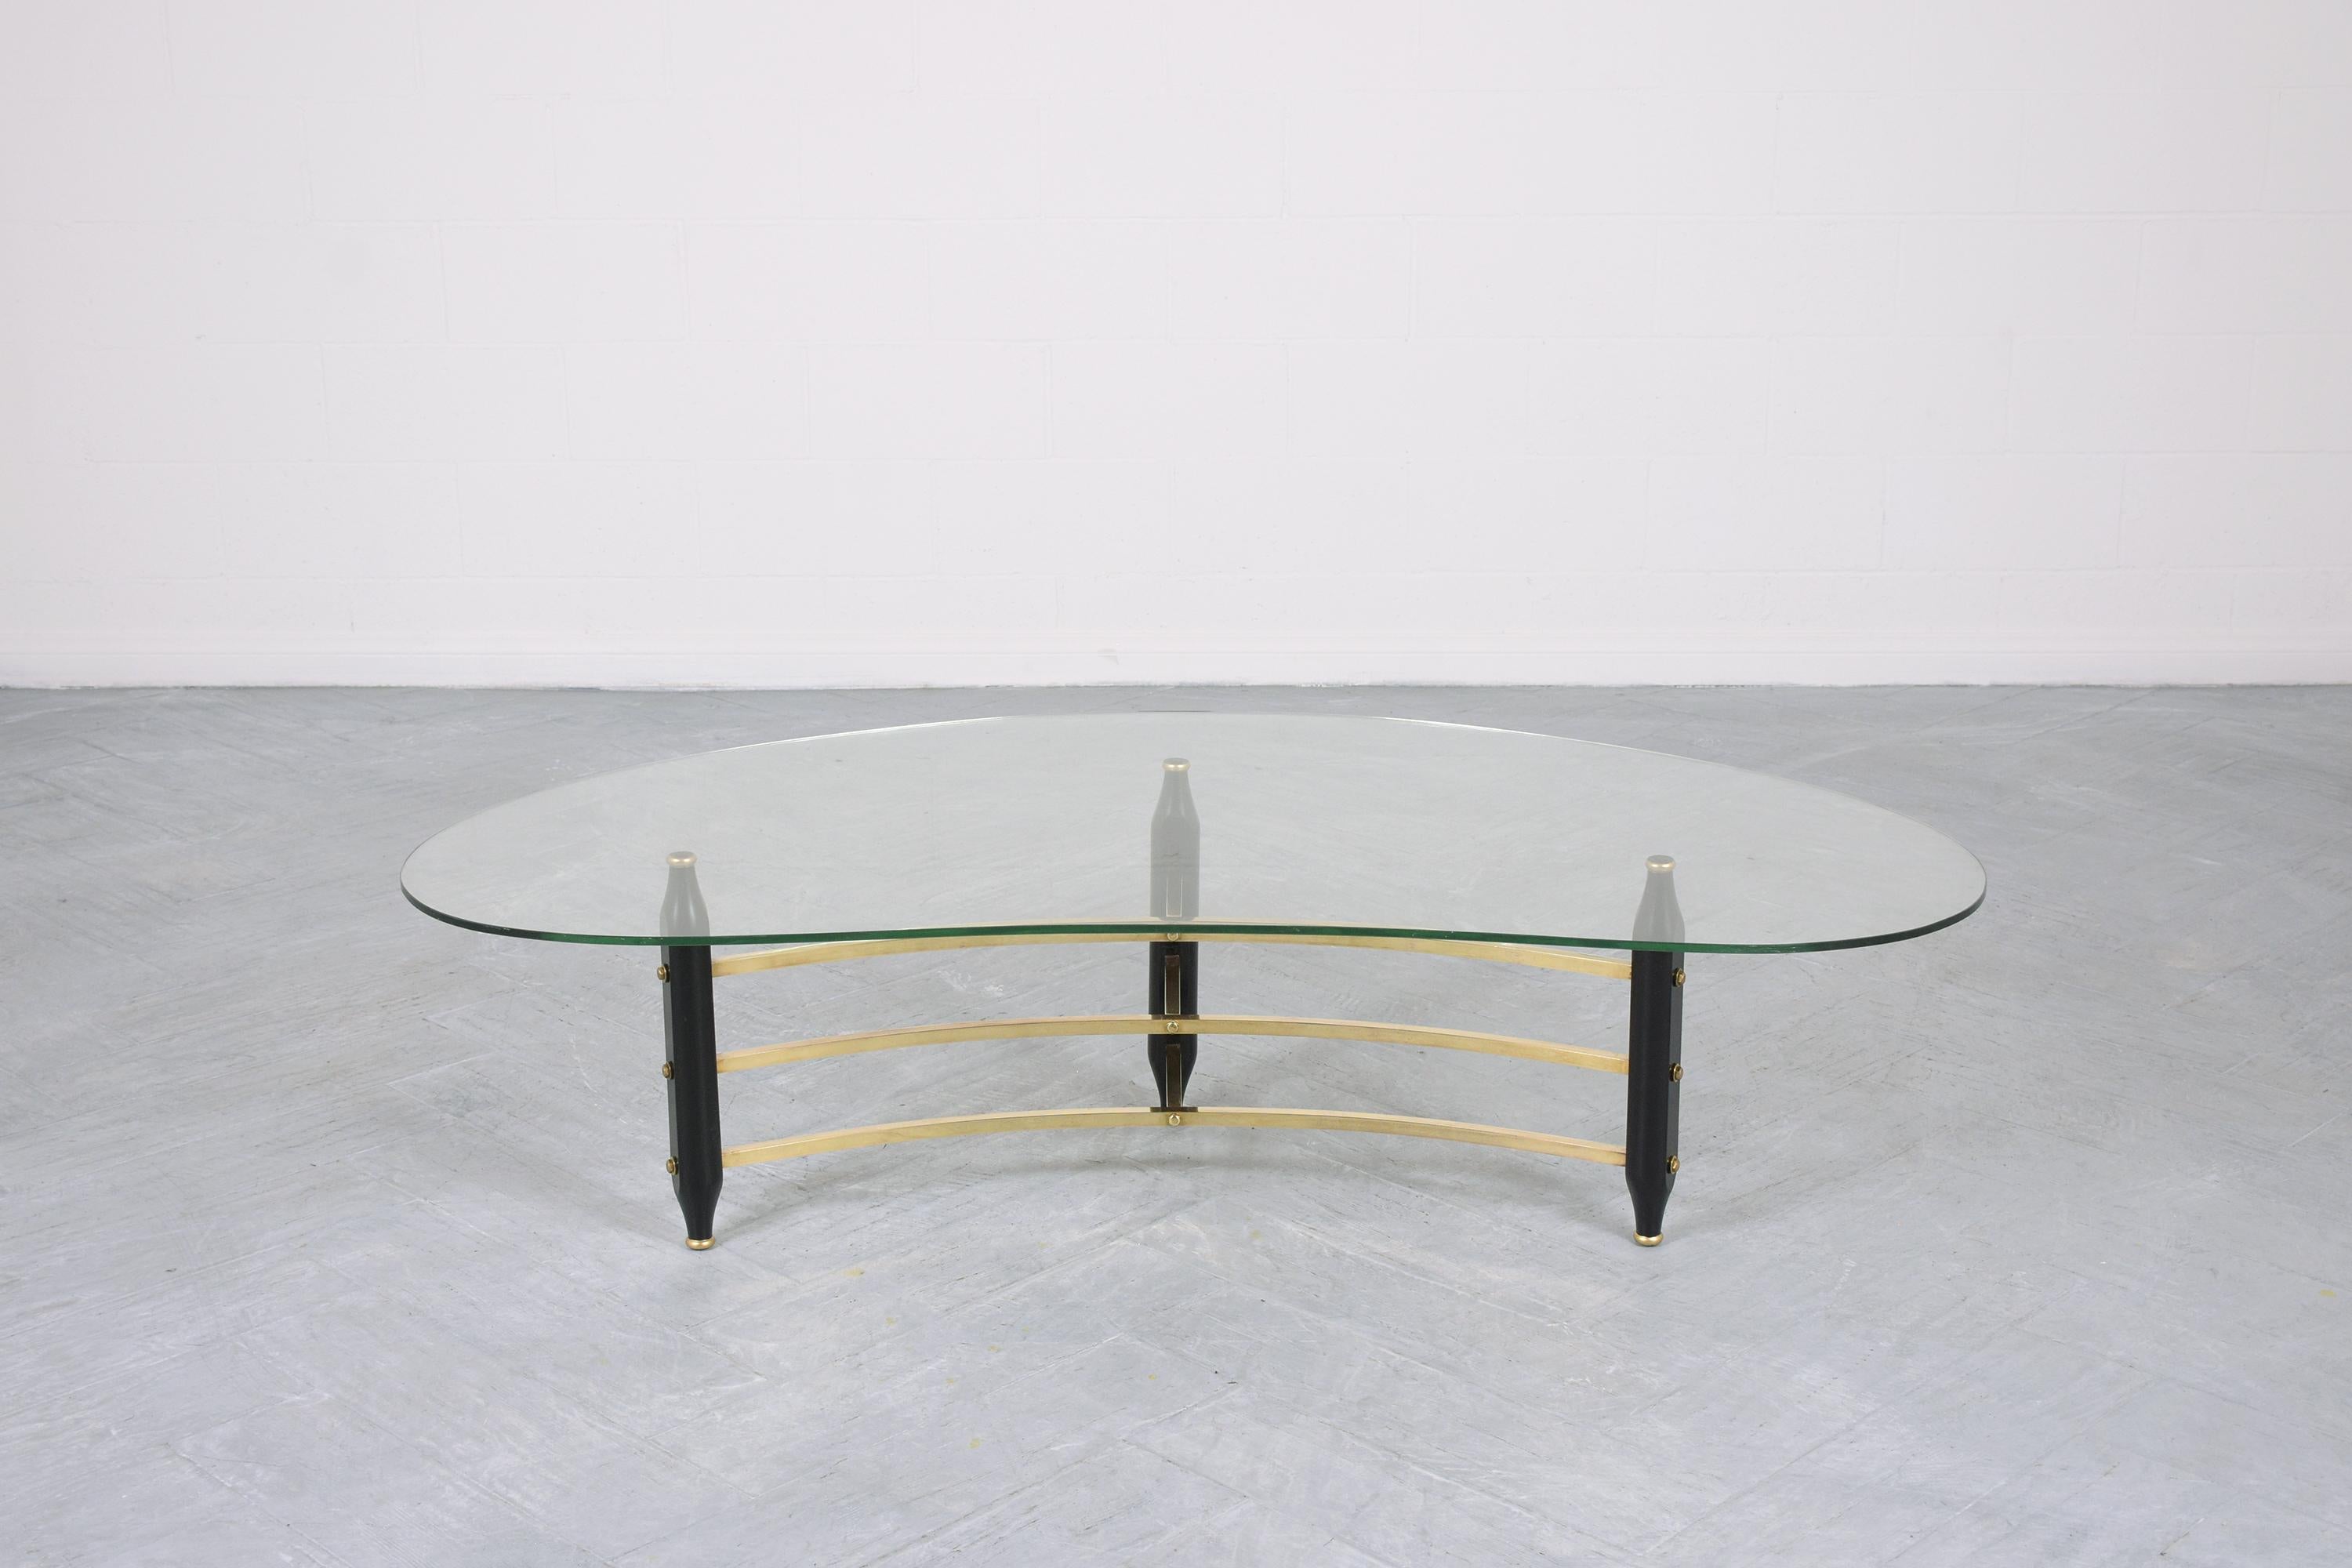 This 1960s Mid-Century Modern brass glass top coffee table has a base crafted out of a wood & brass combination and has been completely restored by our team of expert craftsmen. The table comes with a new kidney-shaped 3/8 inches thick glass top